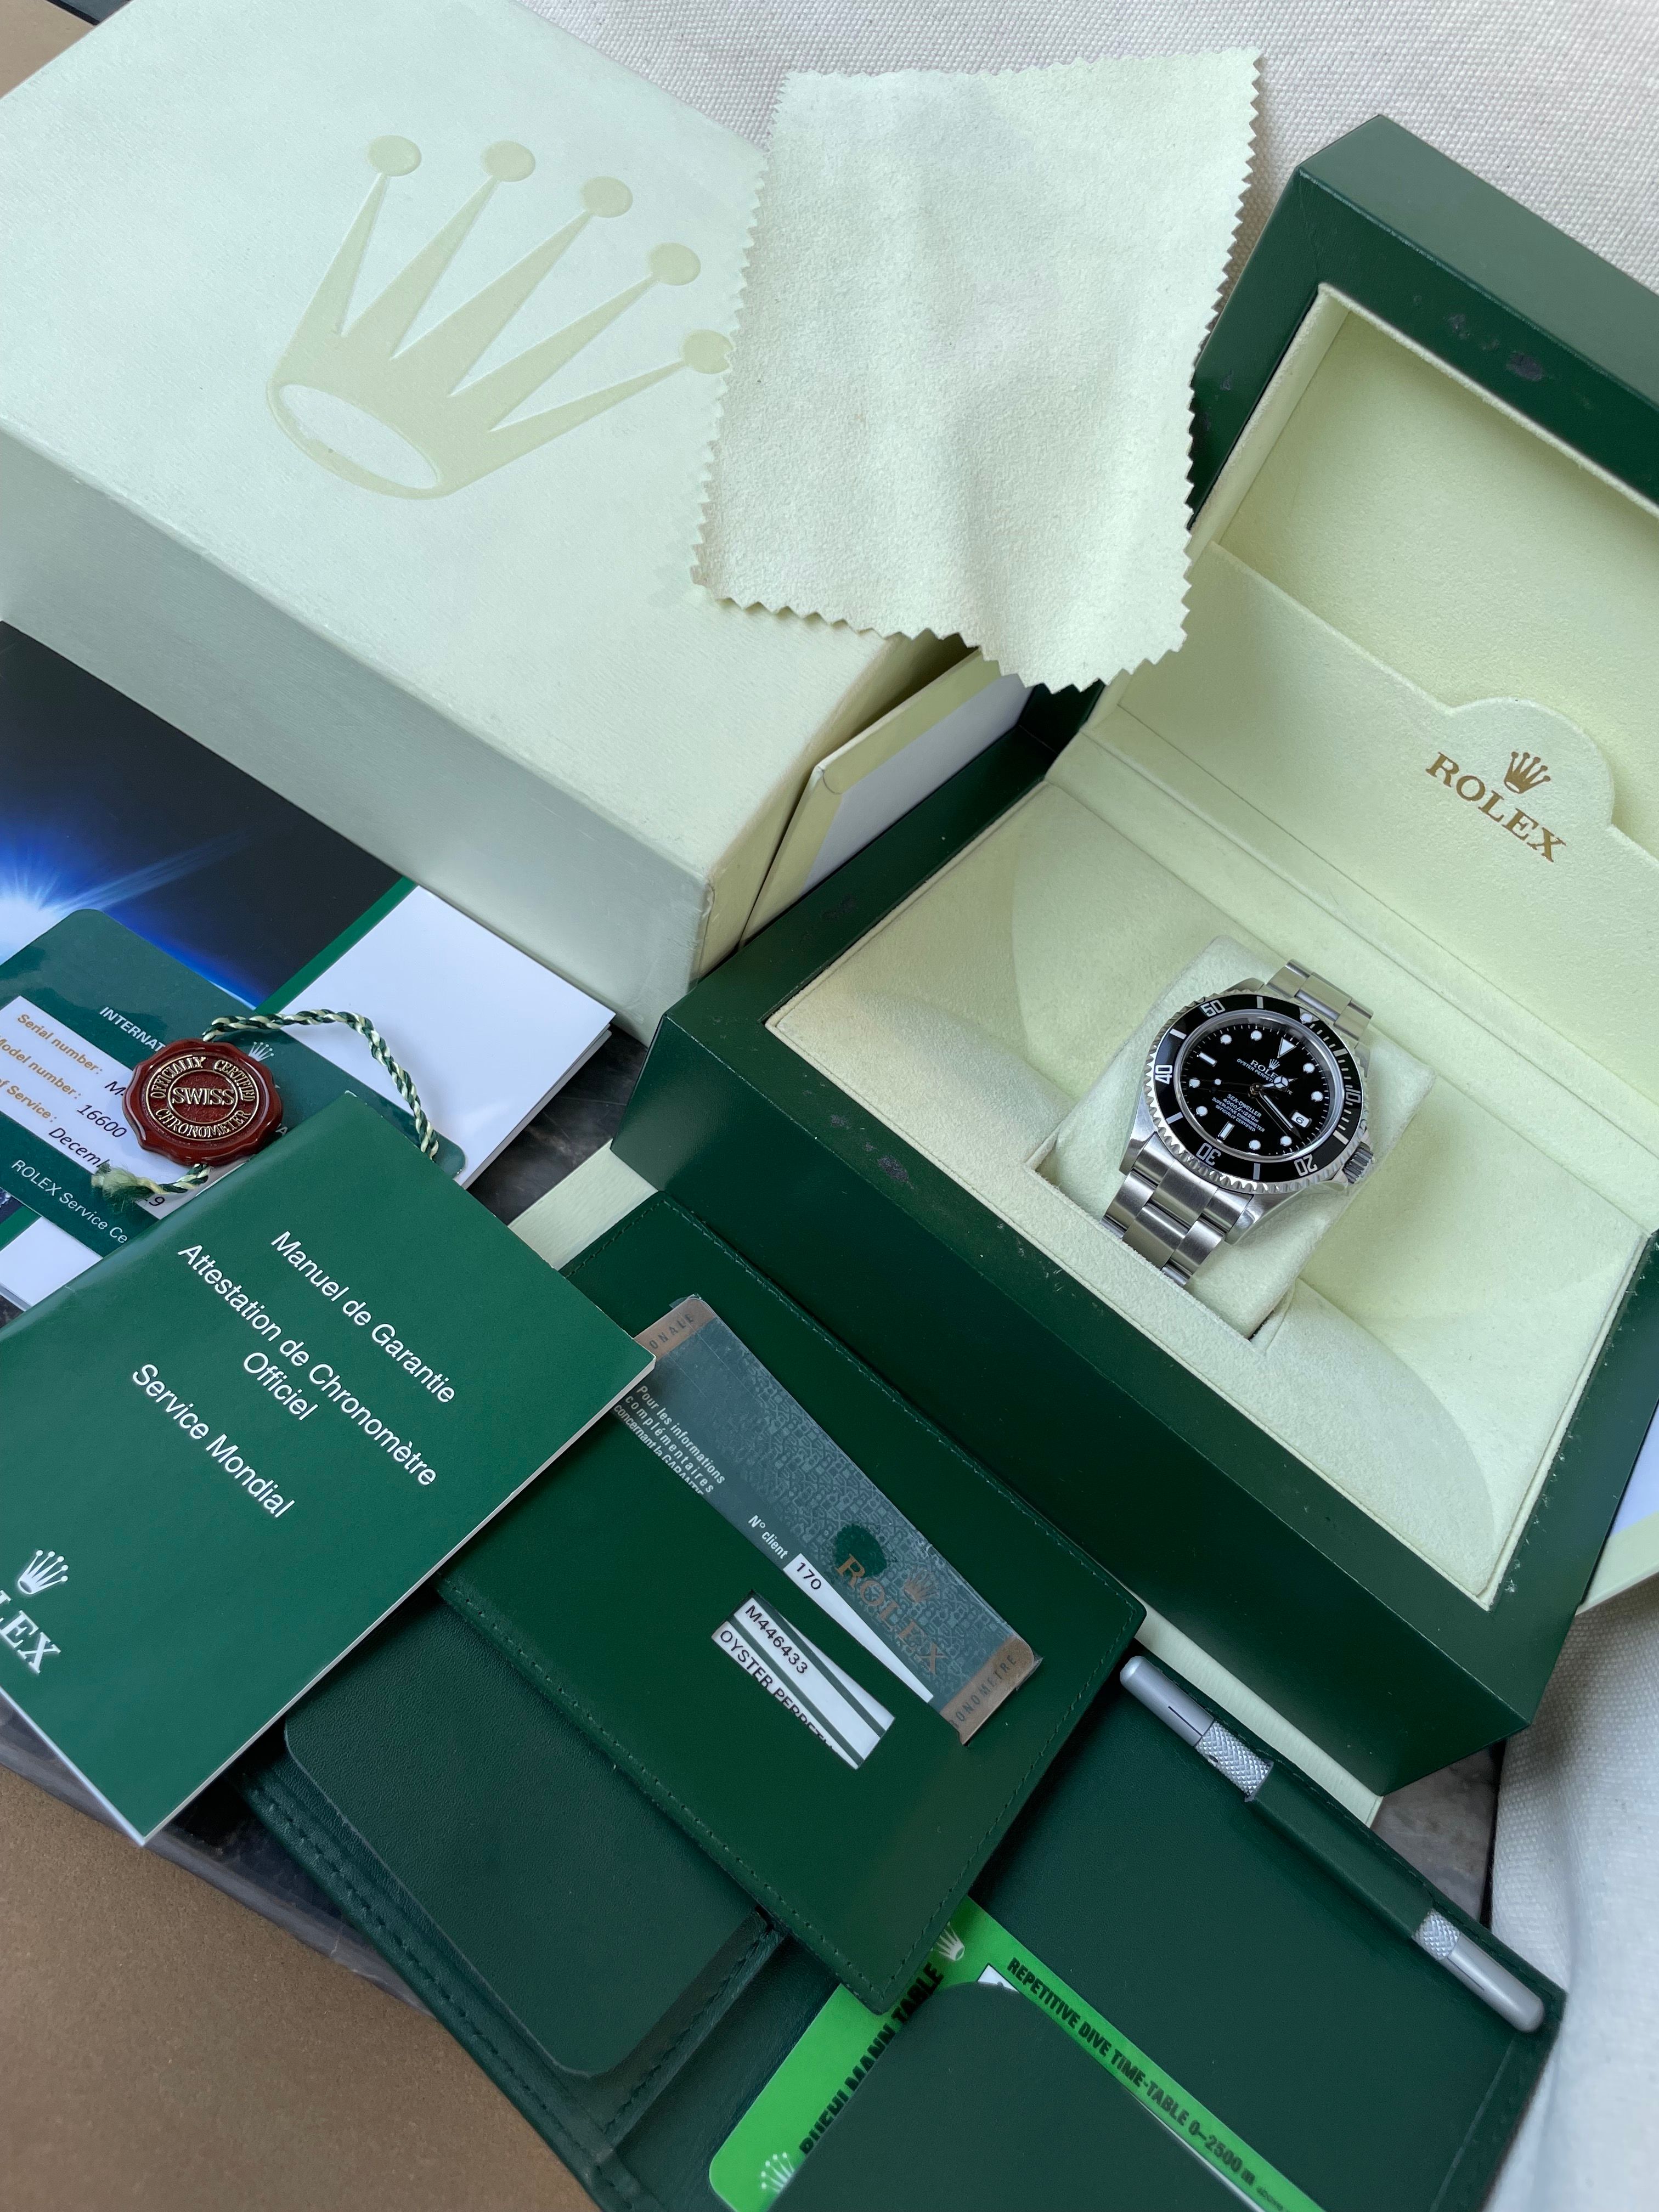 Rolex Sea-Dweller 16600 Black 2008 with original box and papers